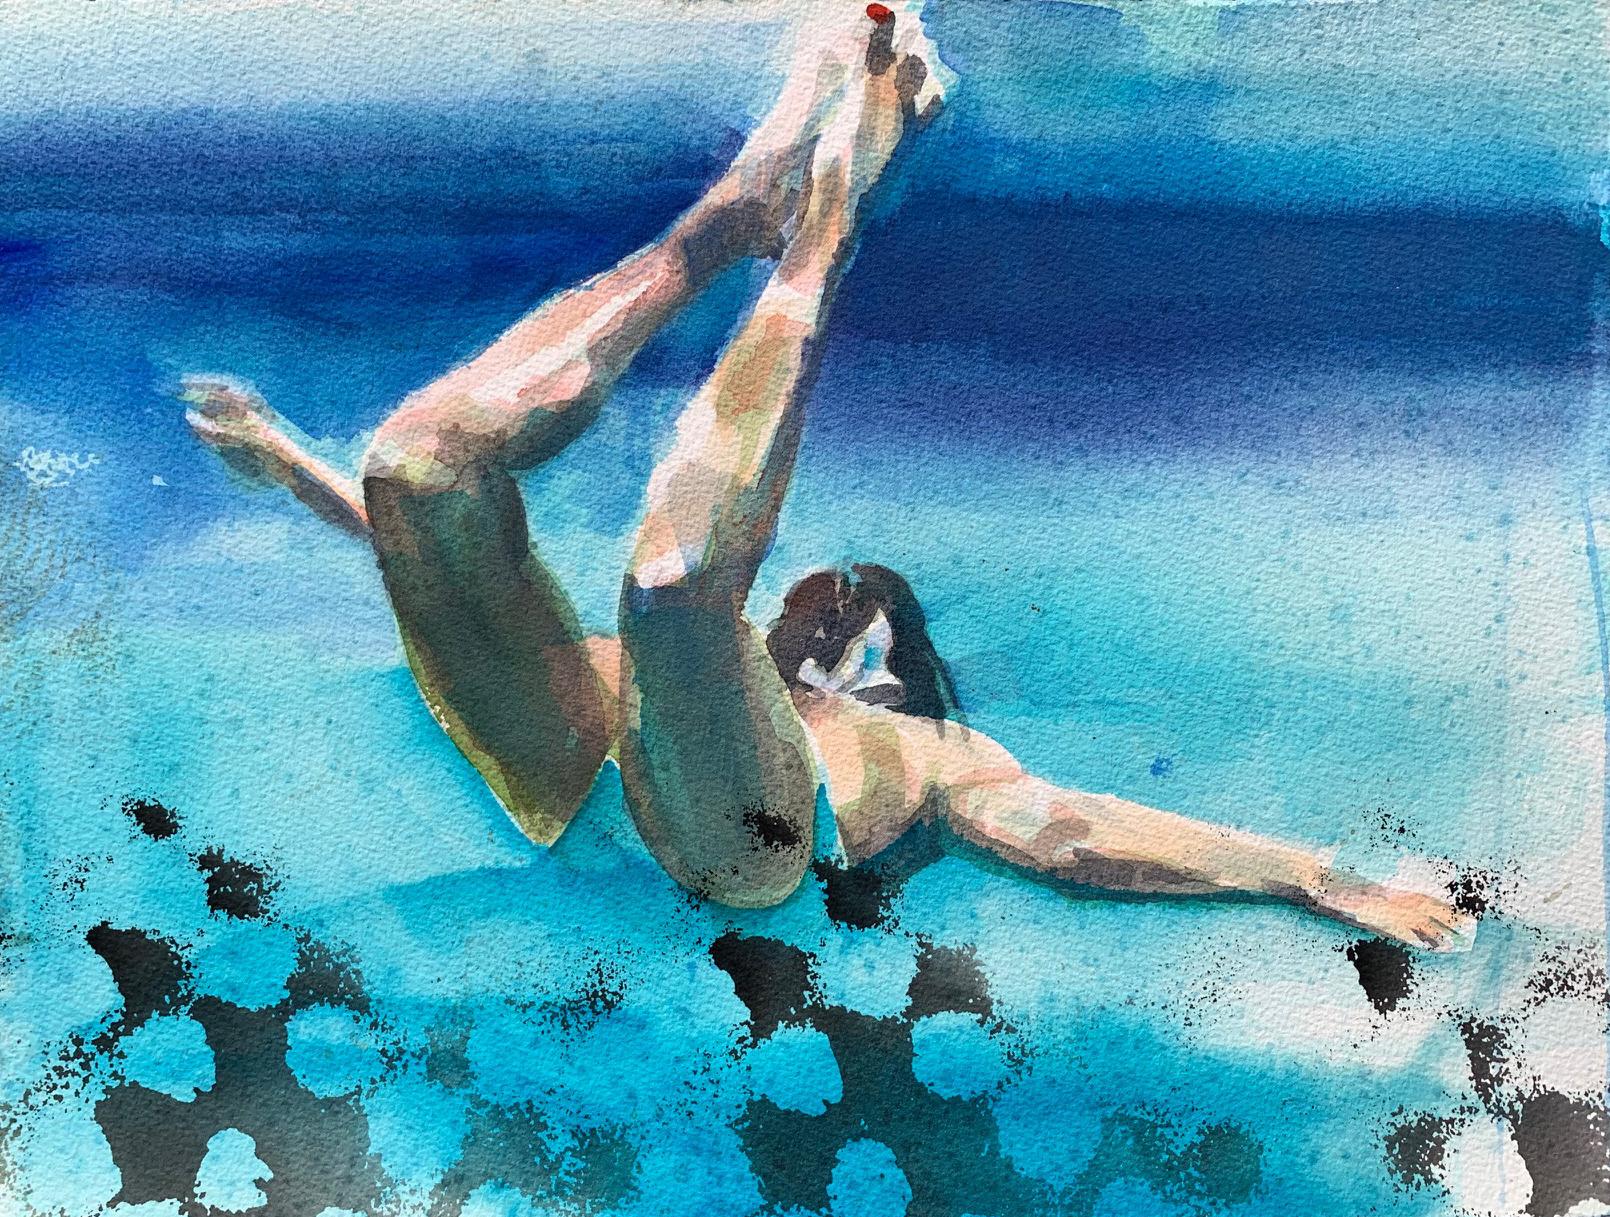 Carol Bennett Figurative Painting - "Lift Study II (paper)" watercolor painting of woman swimming under blue water